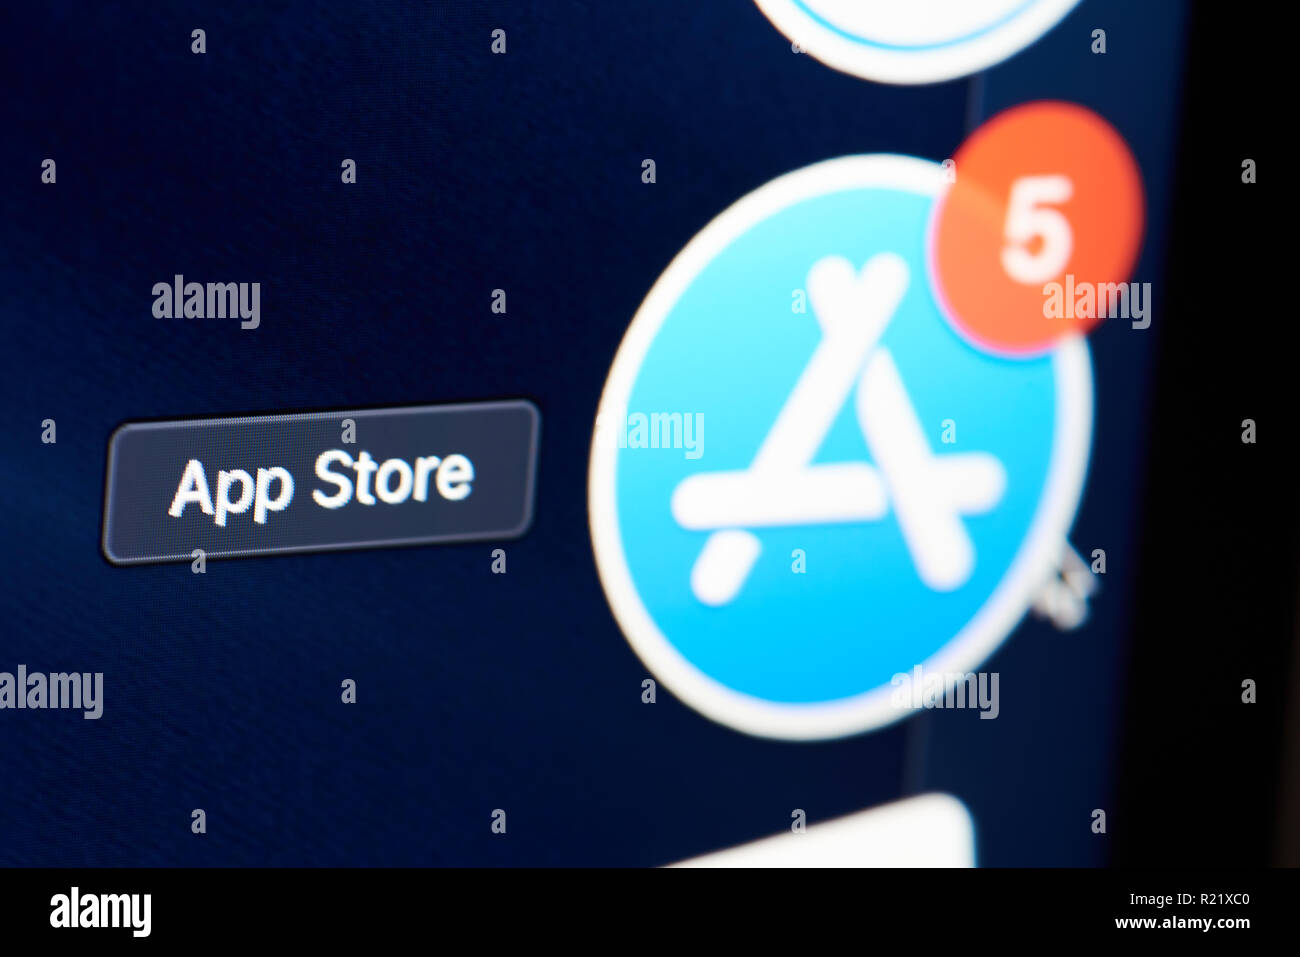 New york, USA - november 15, 2018:App store icon on device screen pixelated close up view Stock Photo